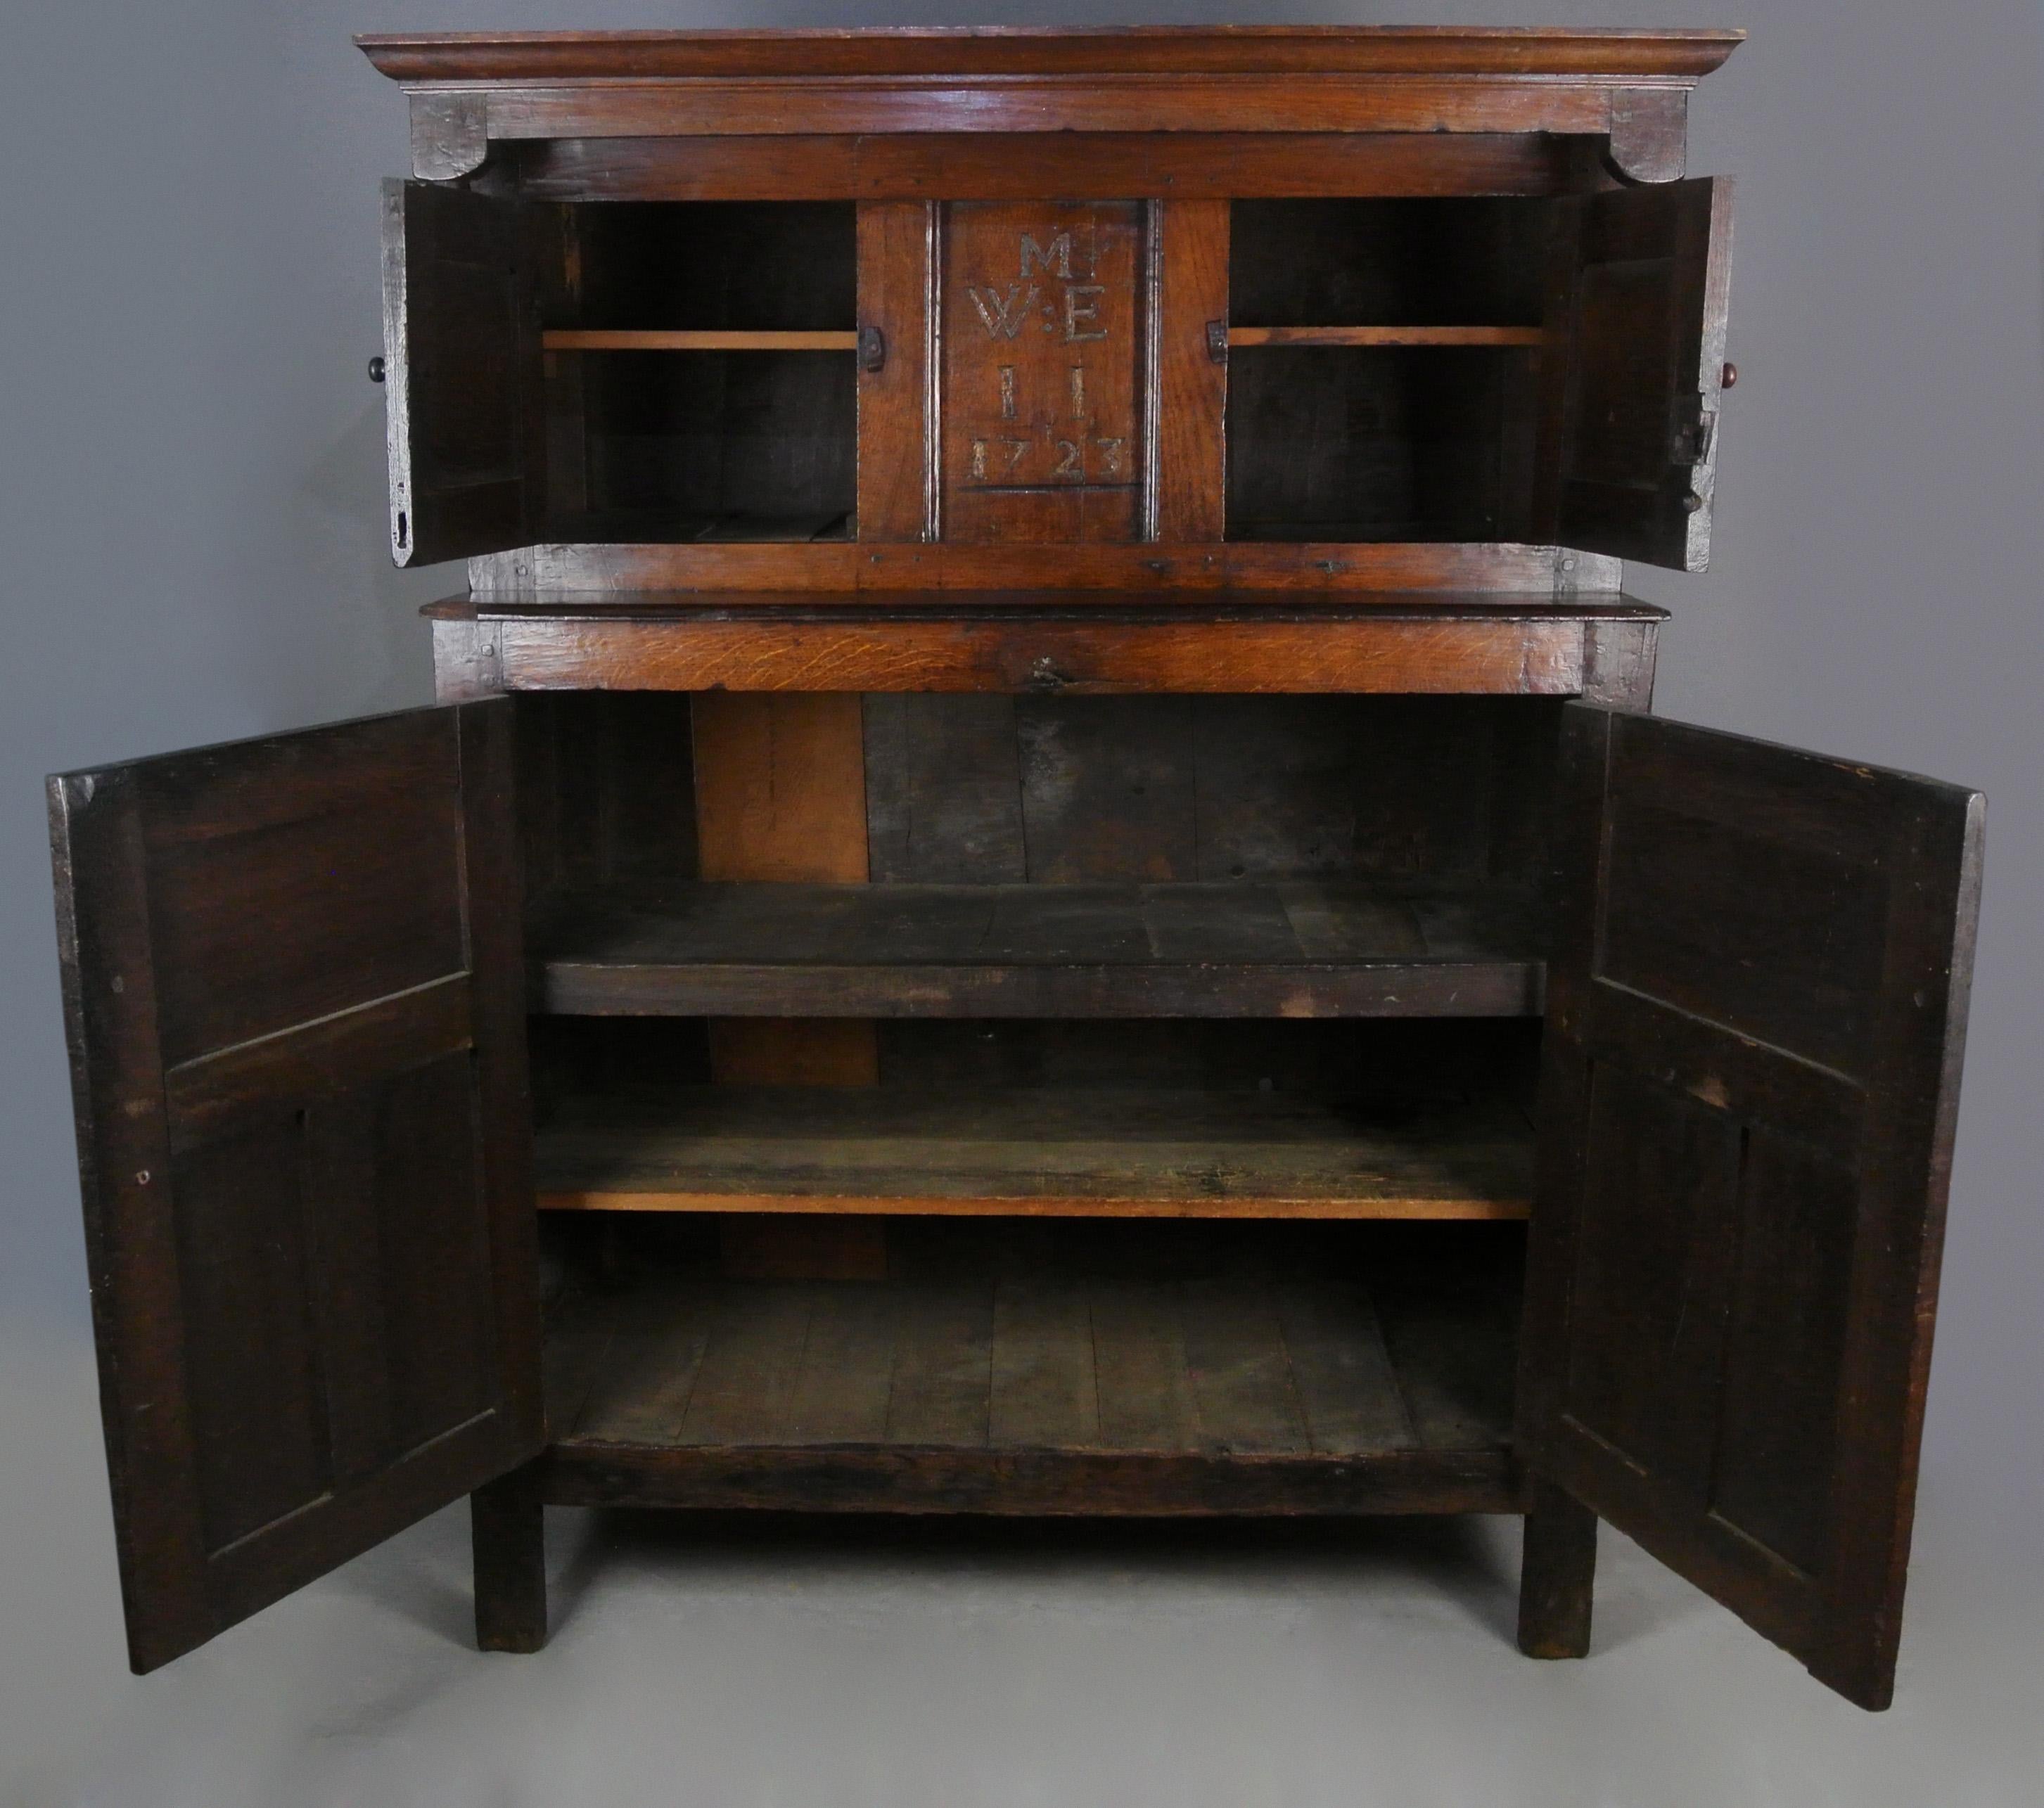 Exceptional Dated English Oak Press Cupboard with Secrets - 1723 For Sale 2